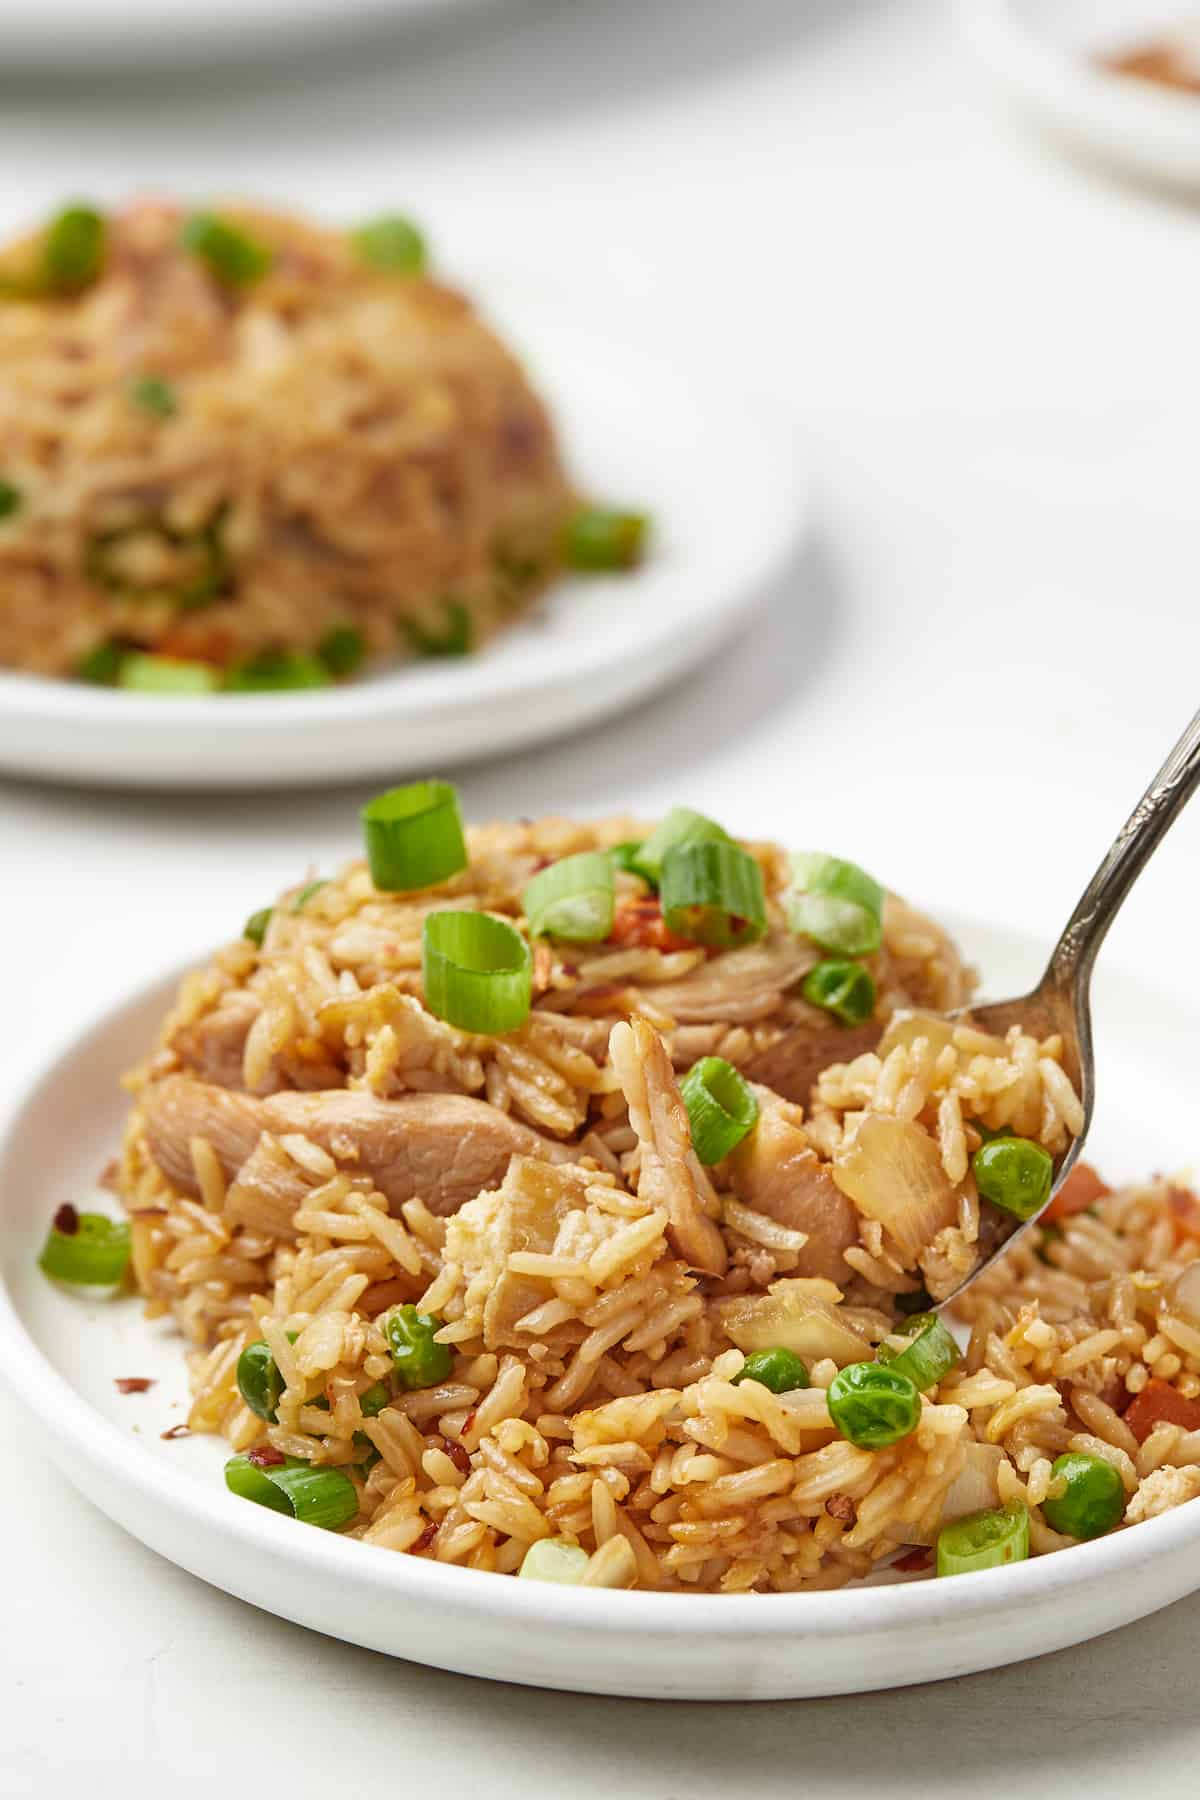 A metal spoon digging into a pile of chicken fried rice on a plate with a second helping on another plate in the background.